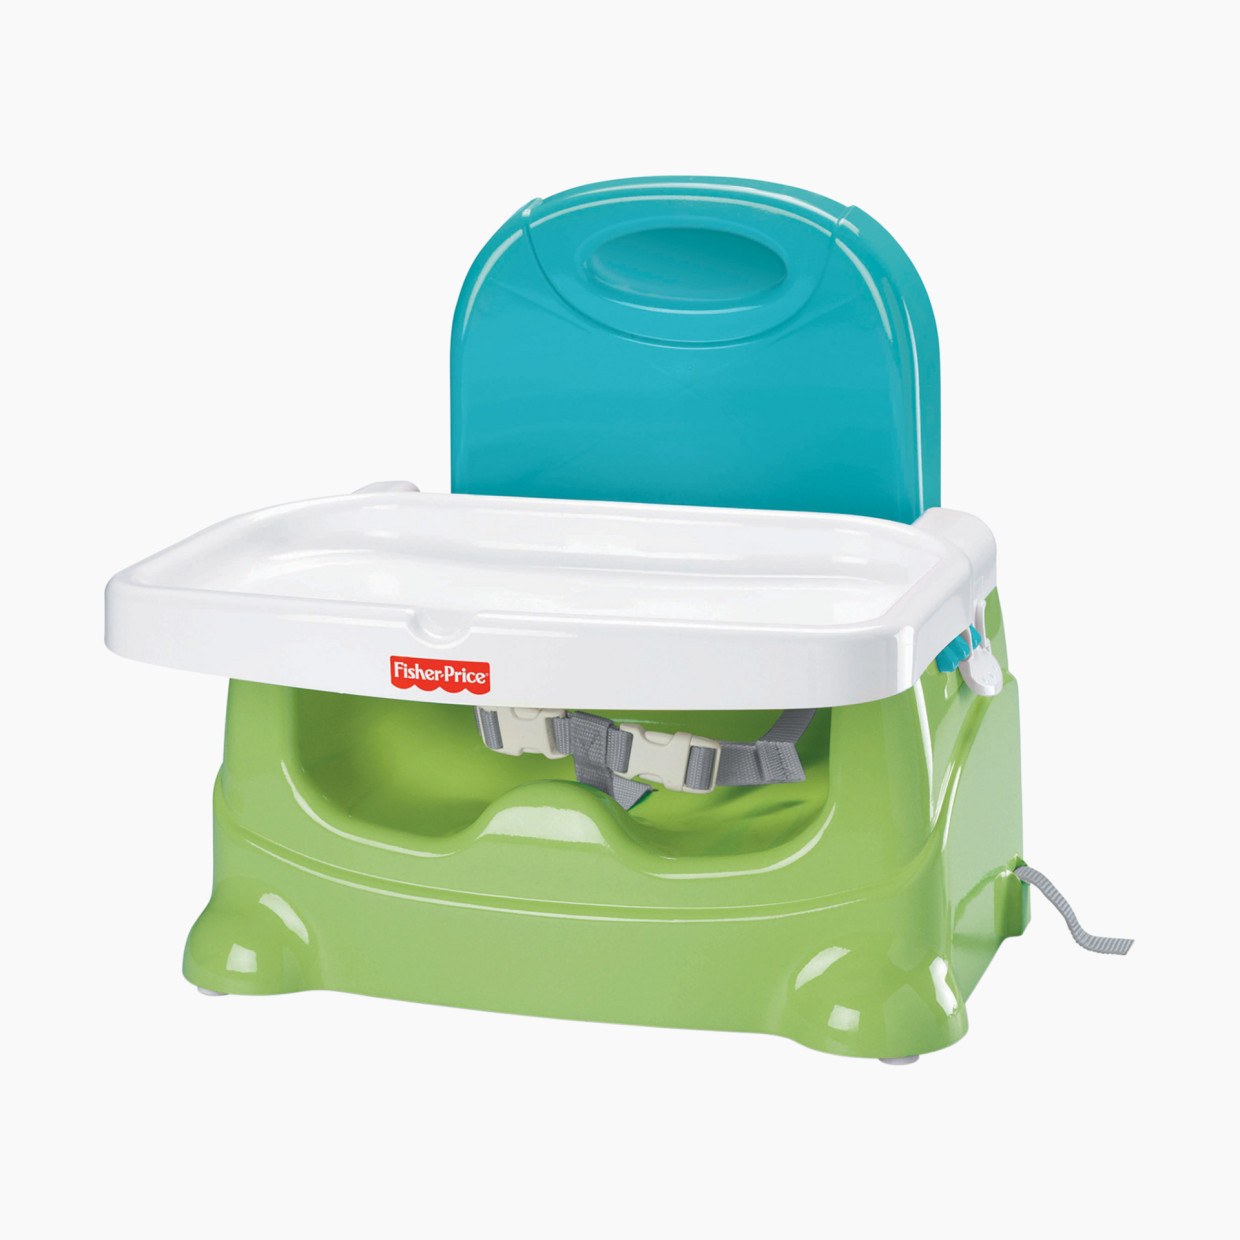 Fisher-Price Healthy Care Booster Seat - Teal/Green.